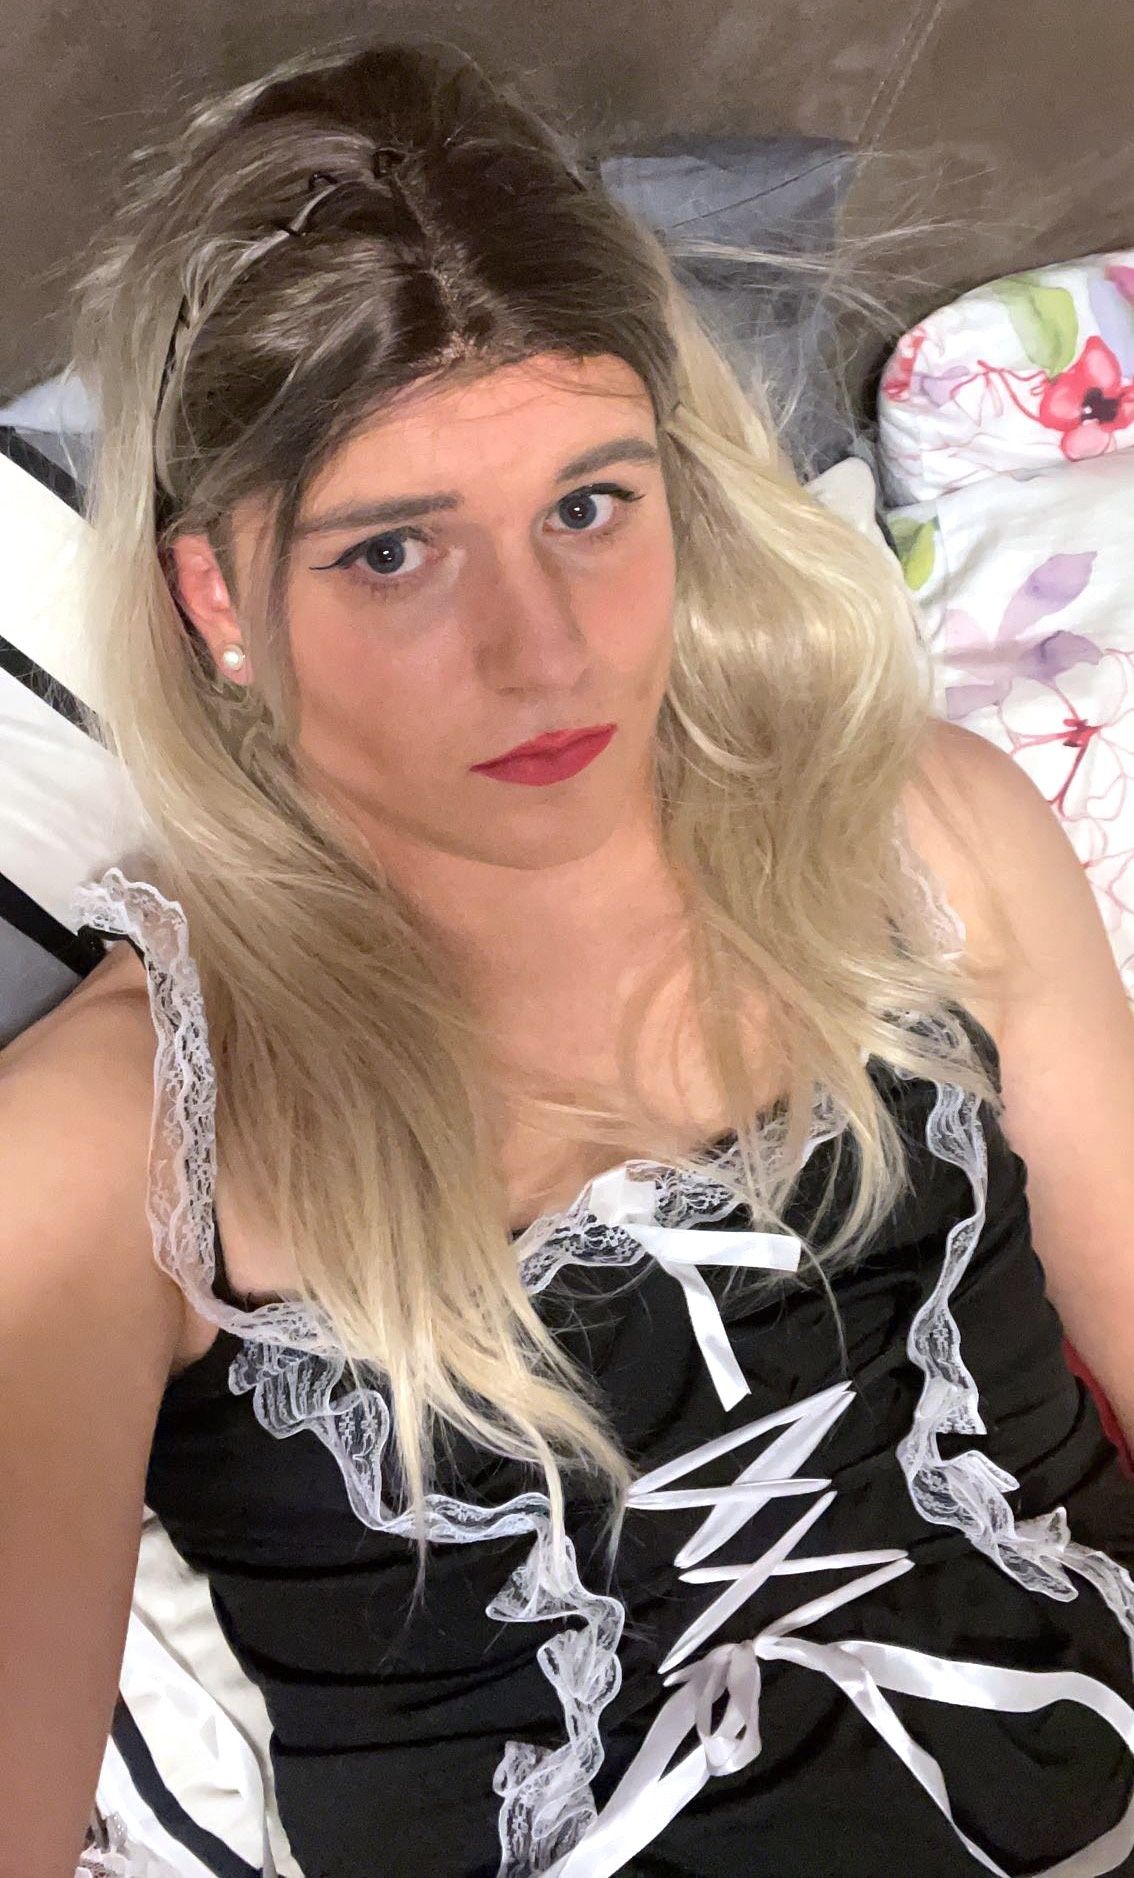 Sissy vallicxte: Love this wig  #10